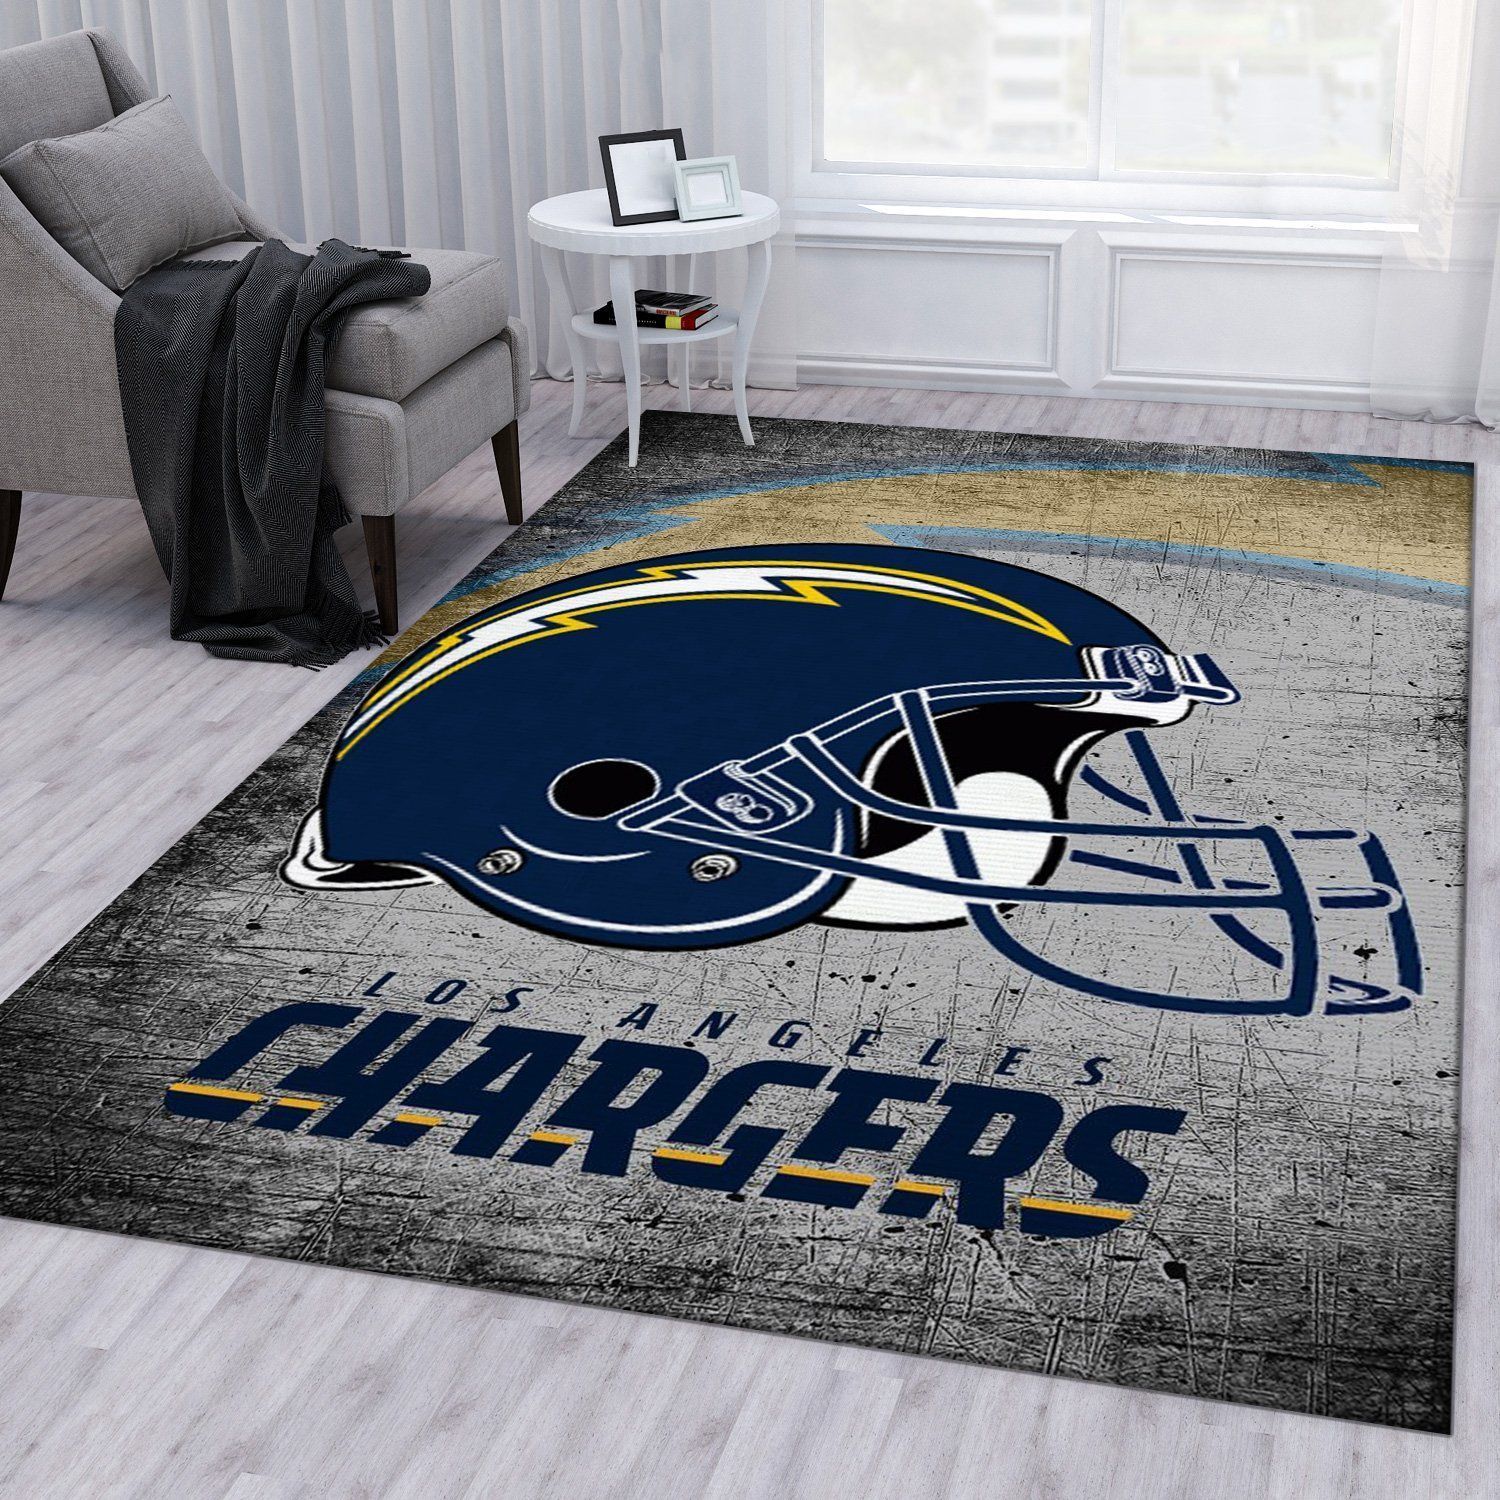 Los Angeles Chargers Nfl Rug Living Room Rug Home Decor Floor Decor - Indoor Outdoor Rugs 1